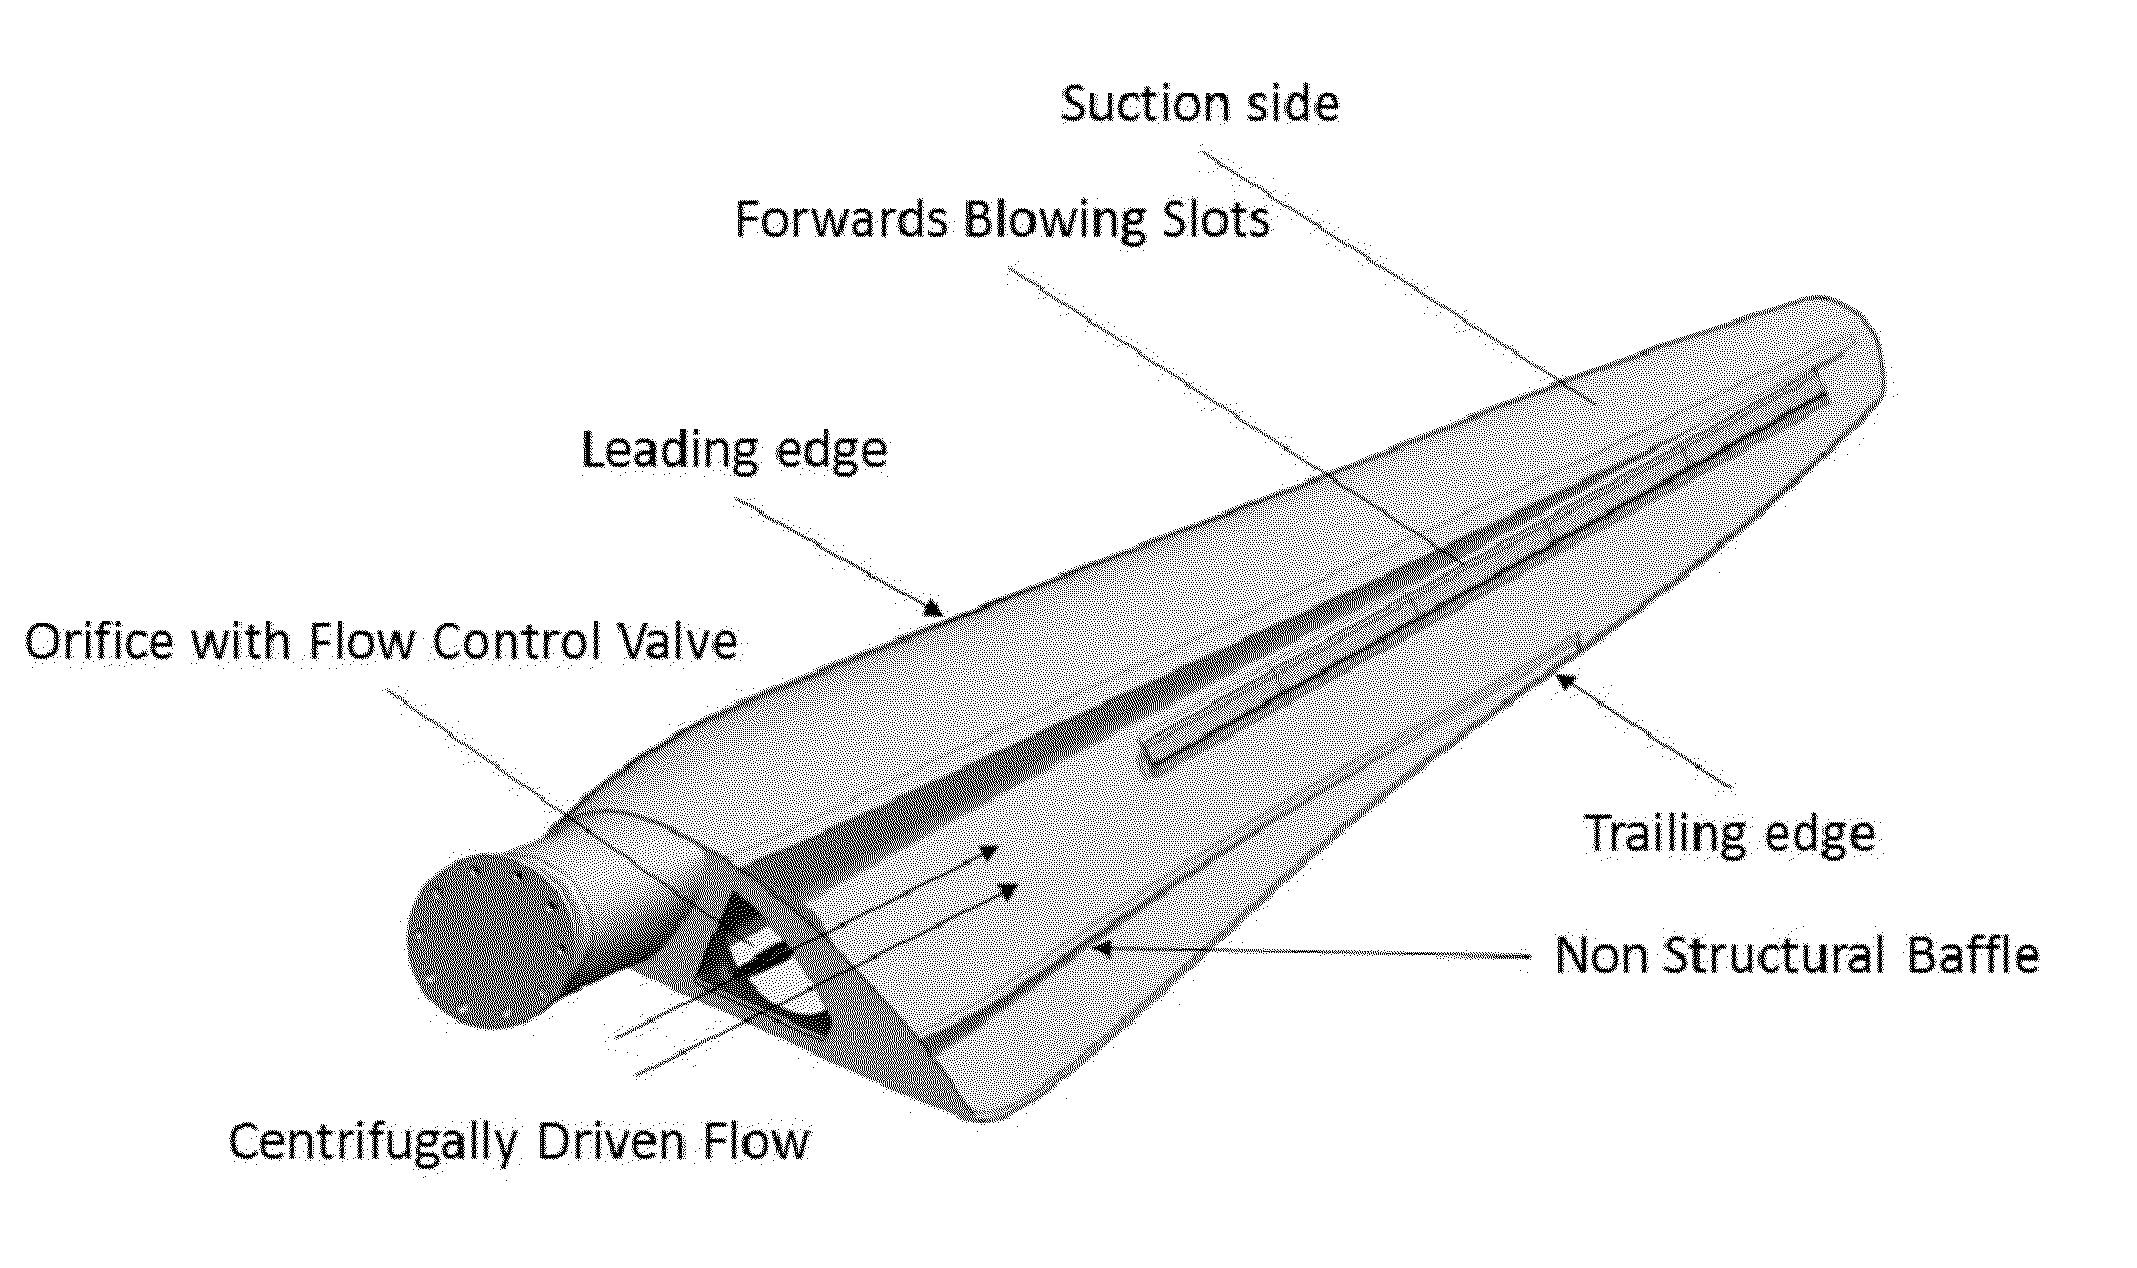 Turbine blades and systems with forward blowing slots